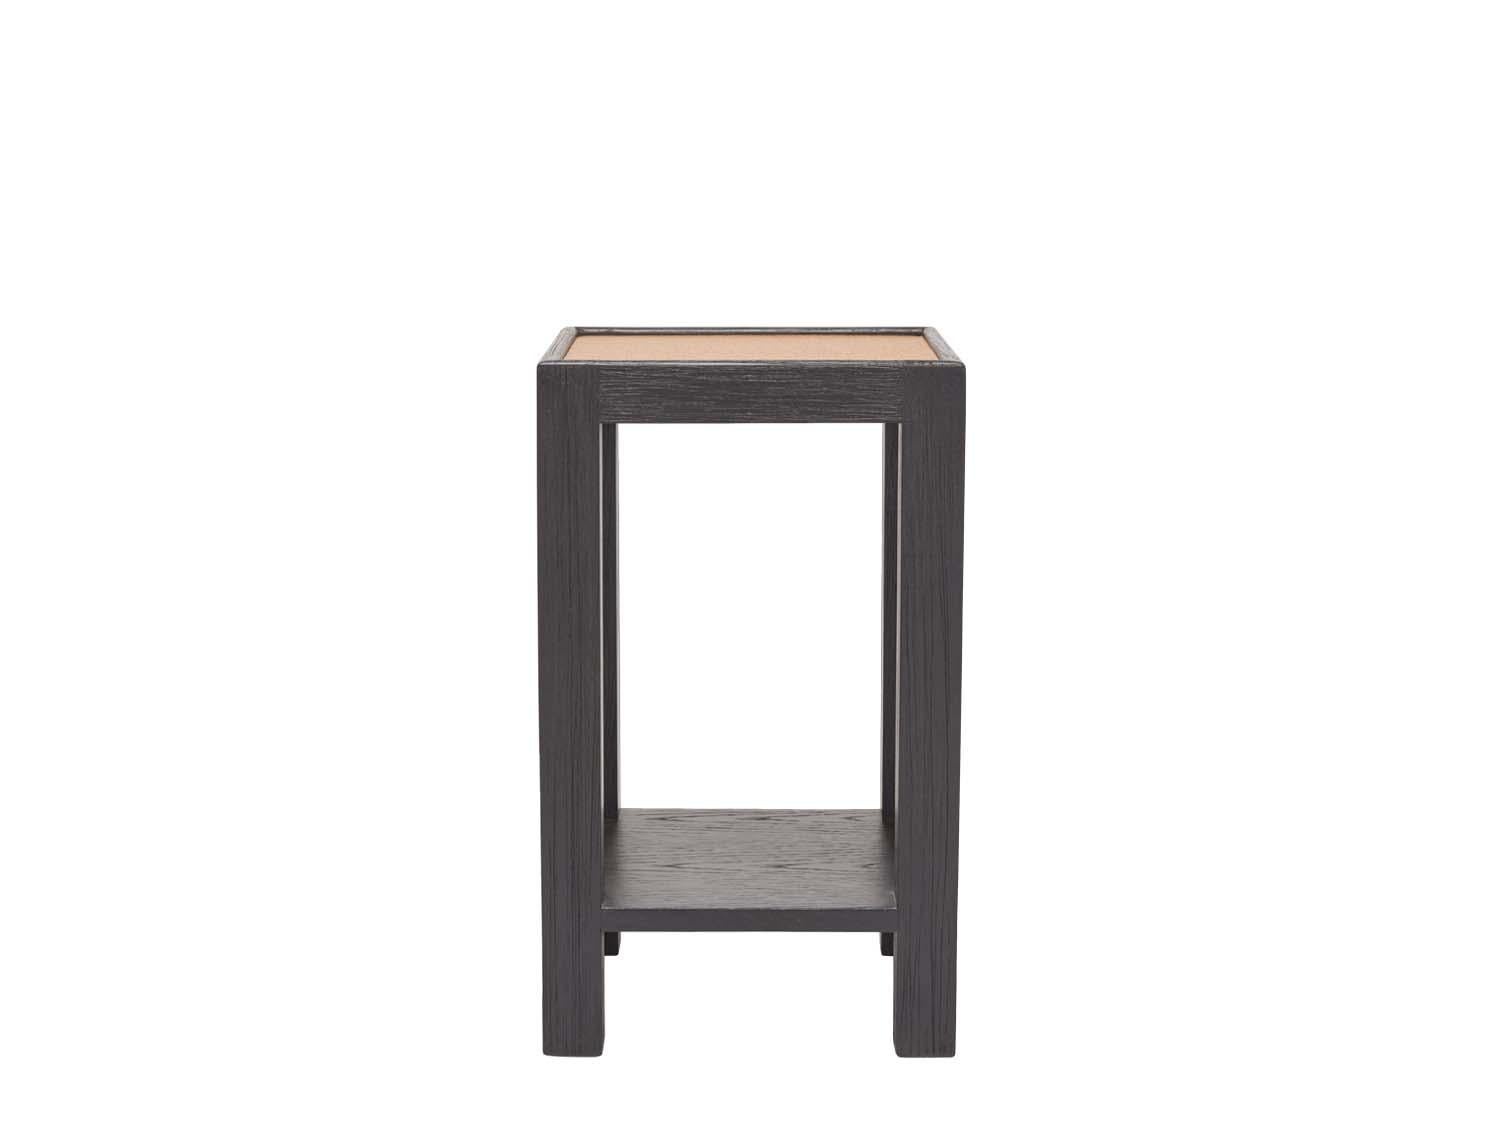 The narrow side table is made of solid American walnut or white oak and features a lower shelf and your choice of a cork or bronze mirror top. 

The Lawson-Fenning Collection is designed and handmade in Los Angeles, California.

 